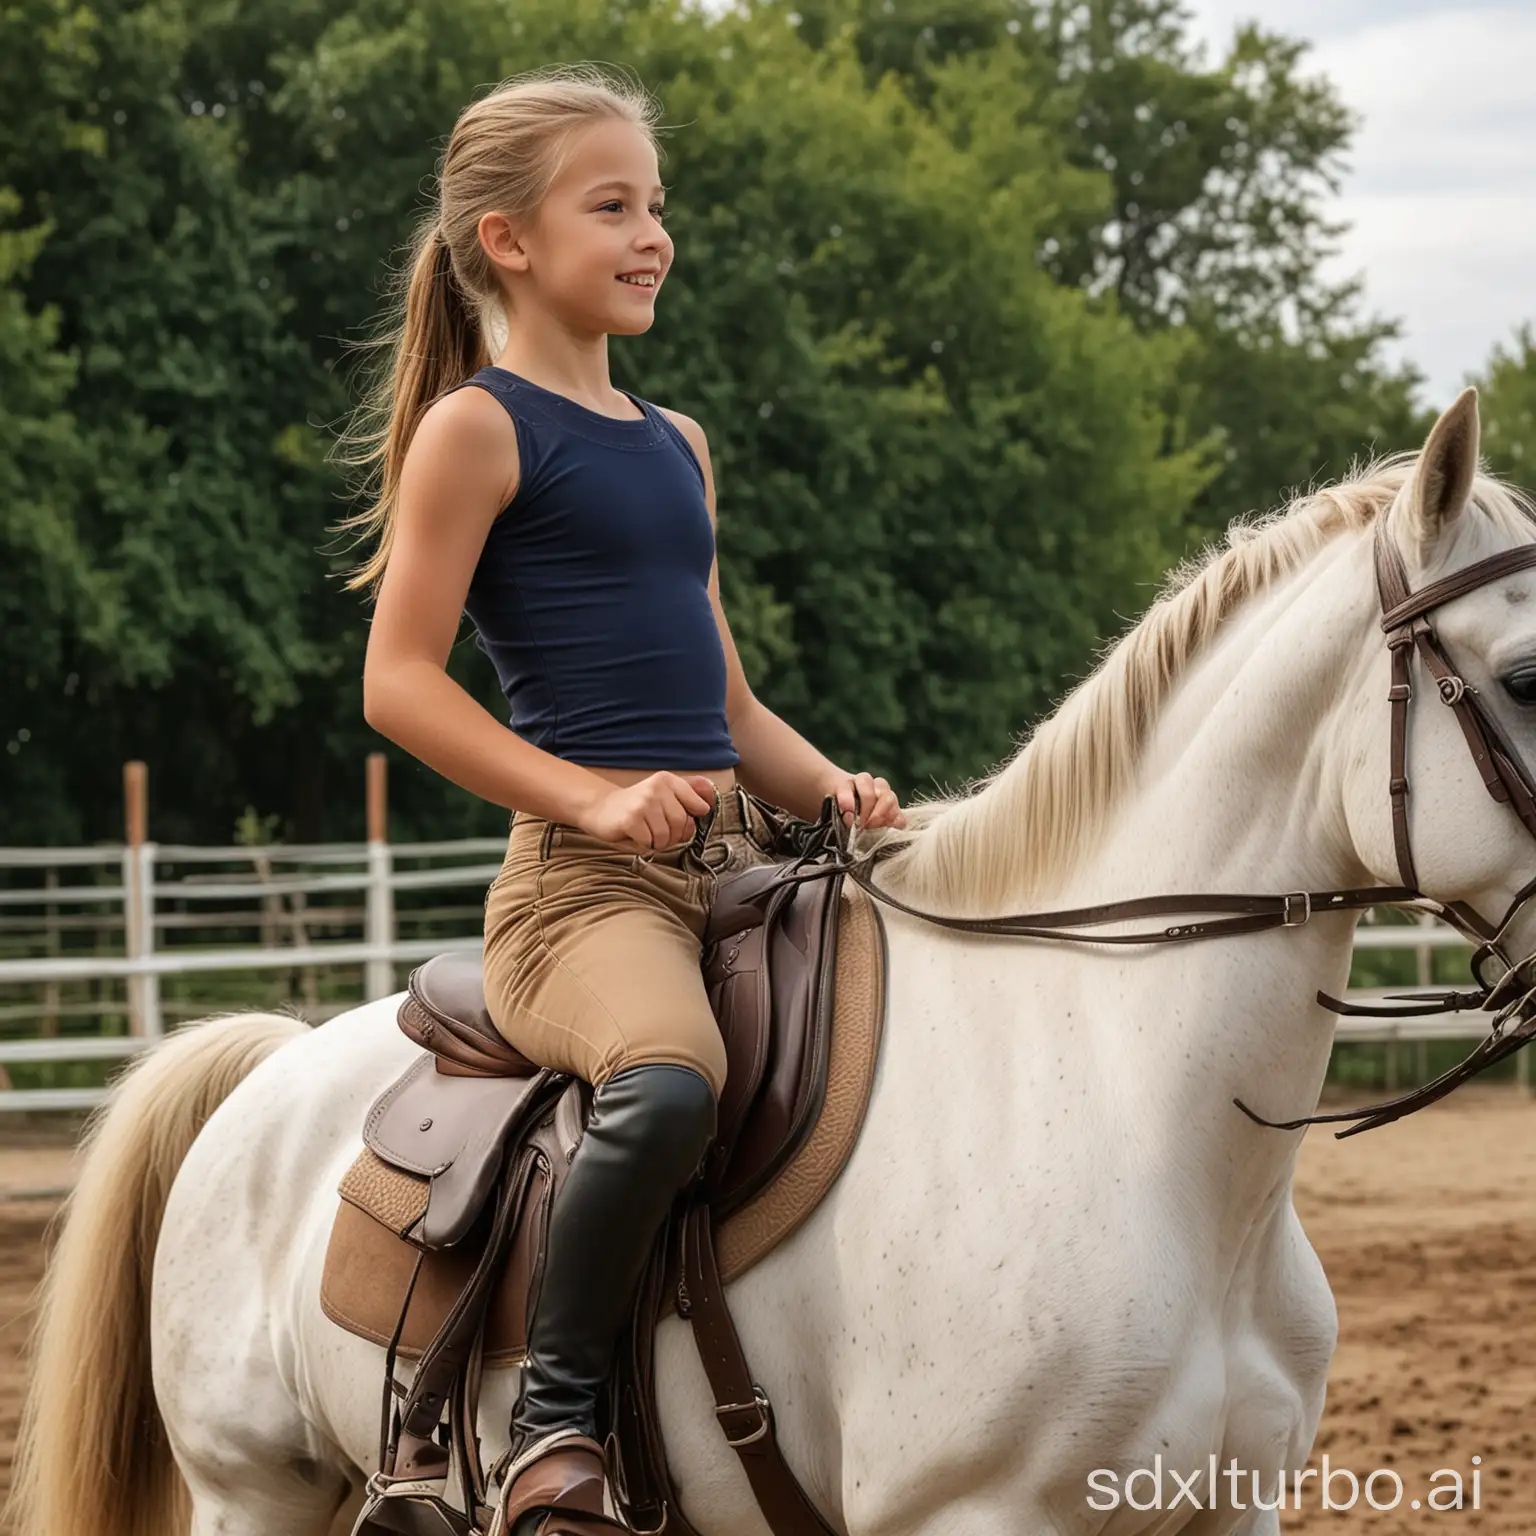 Young-Girl-Riding-Horse-Bareback-in-Crop-Top-and-Jodhpurs